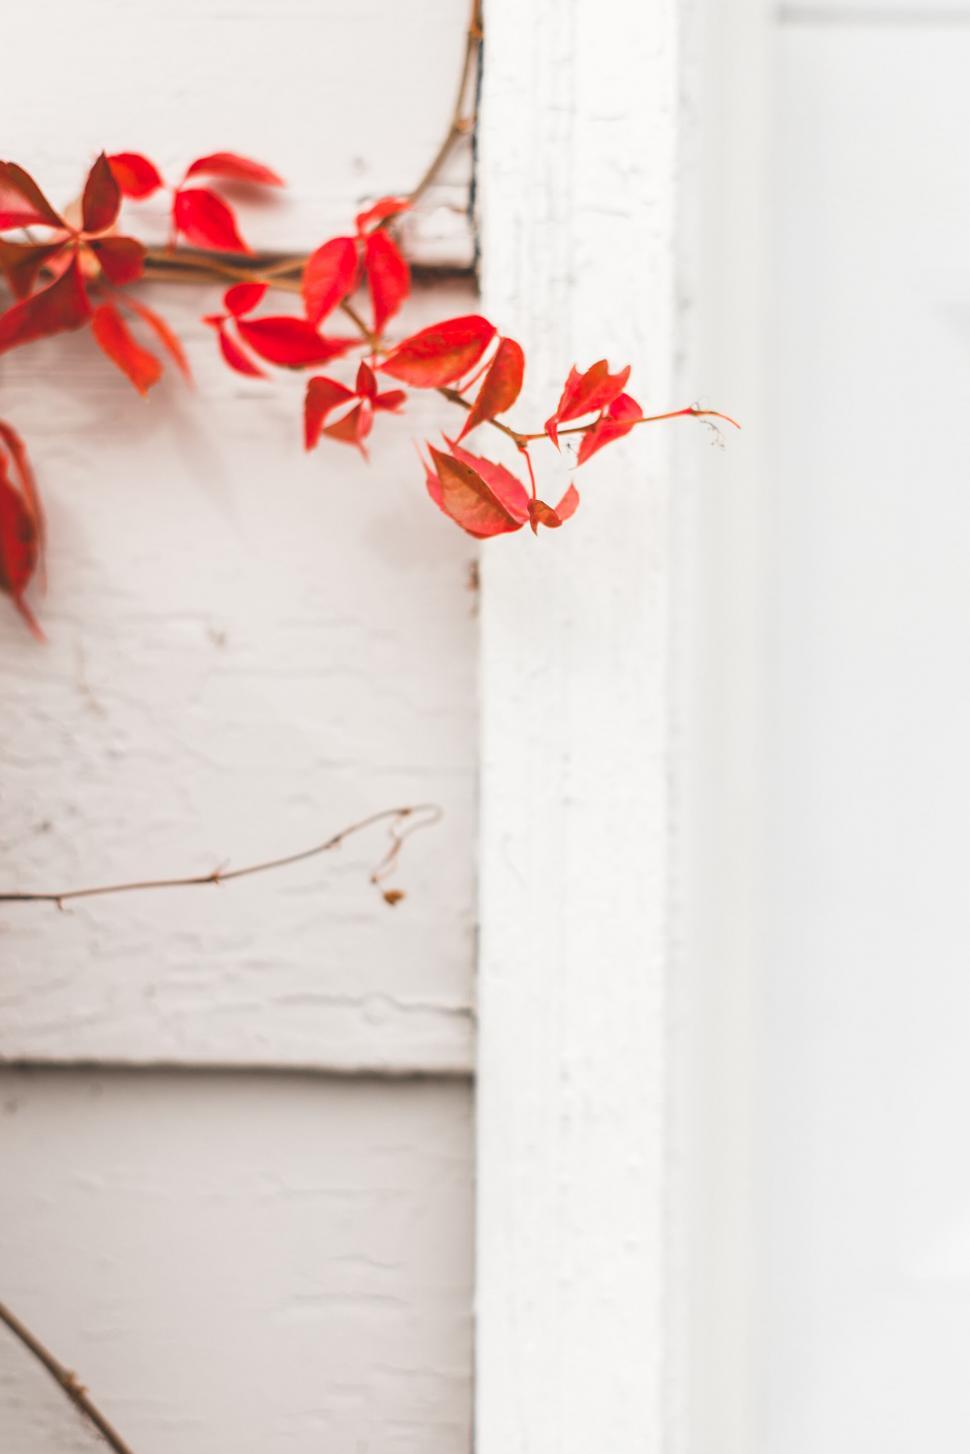 Free Image of A red leaves on a white wall 